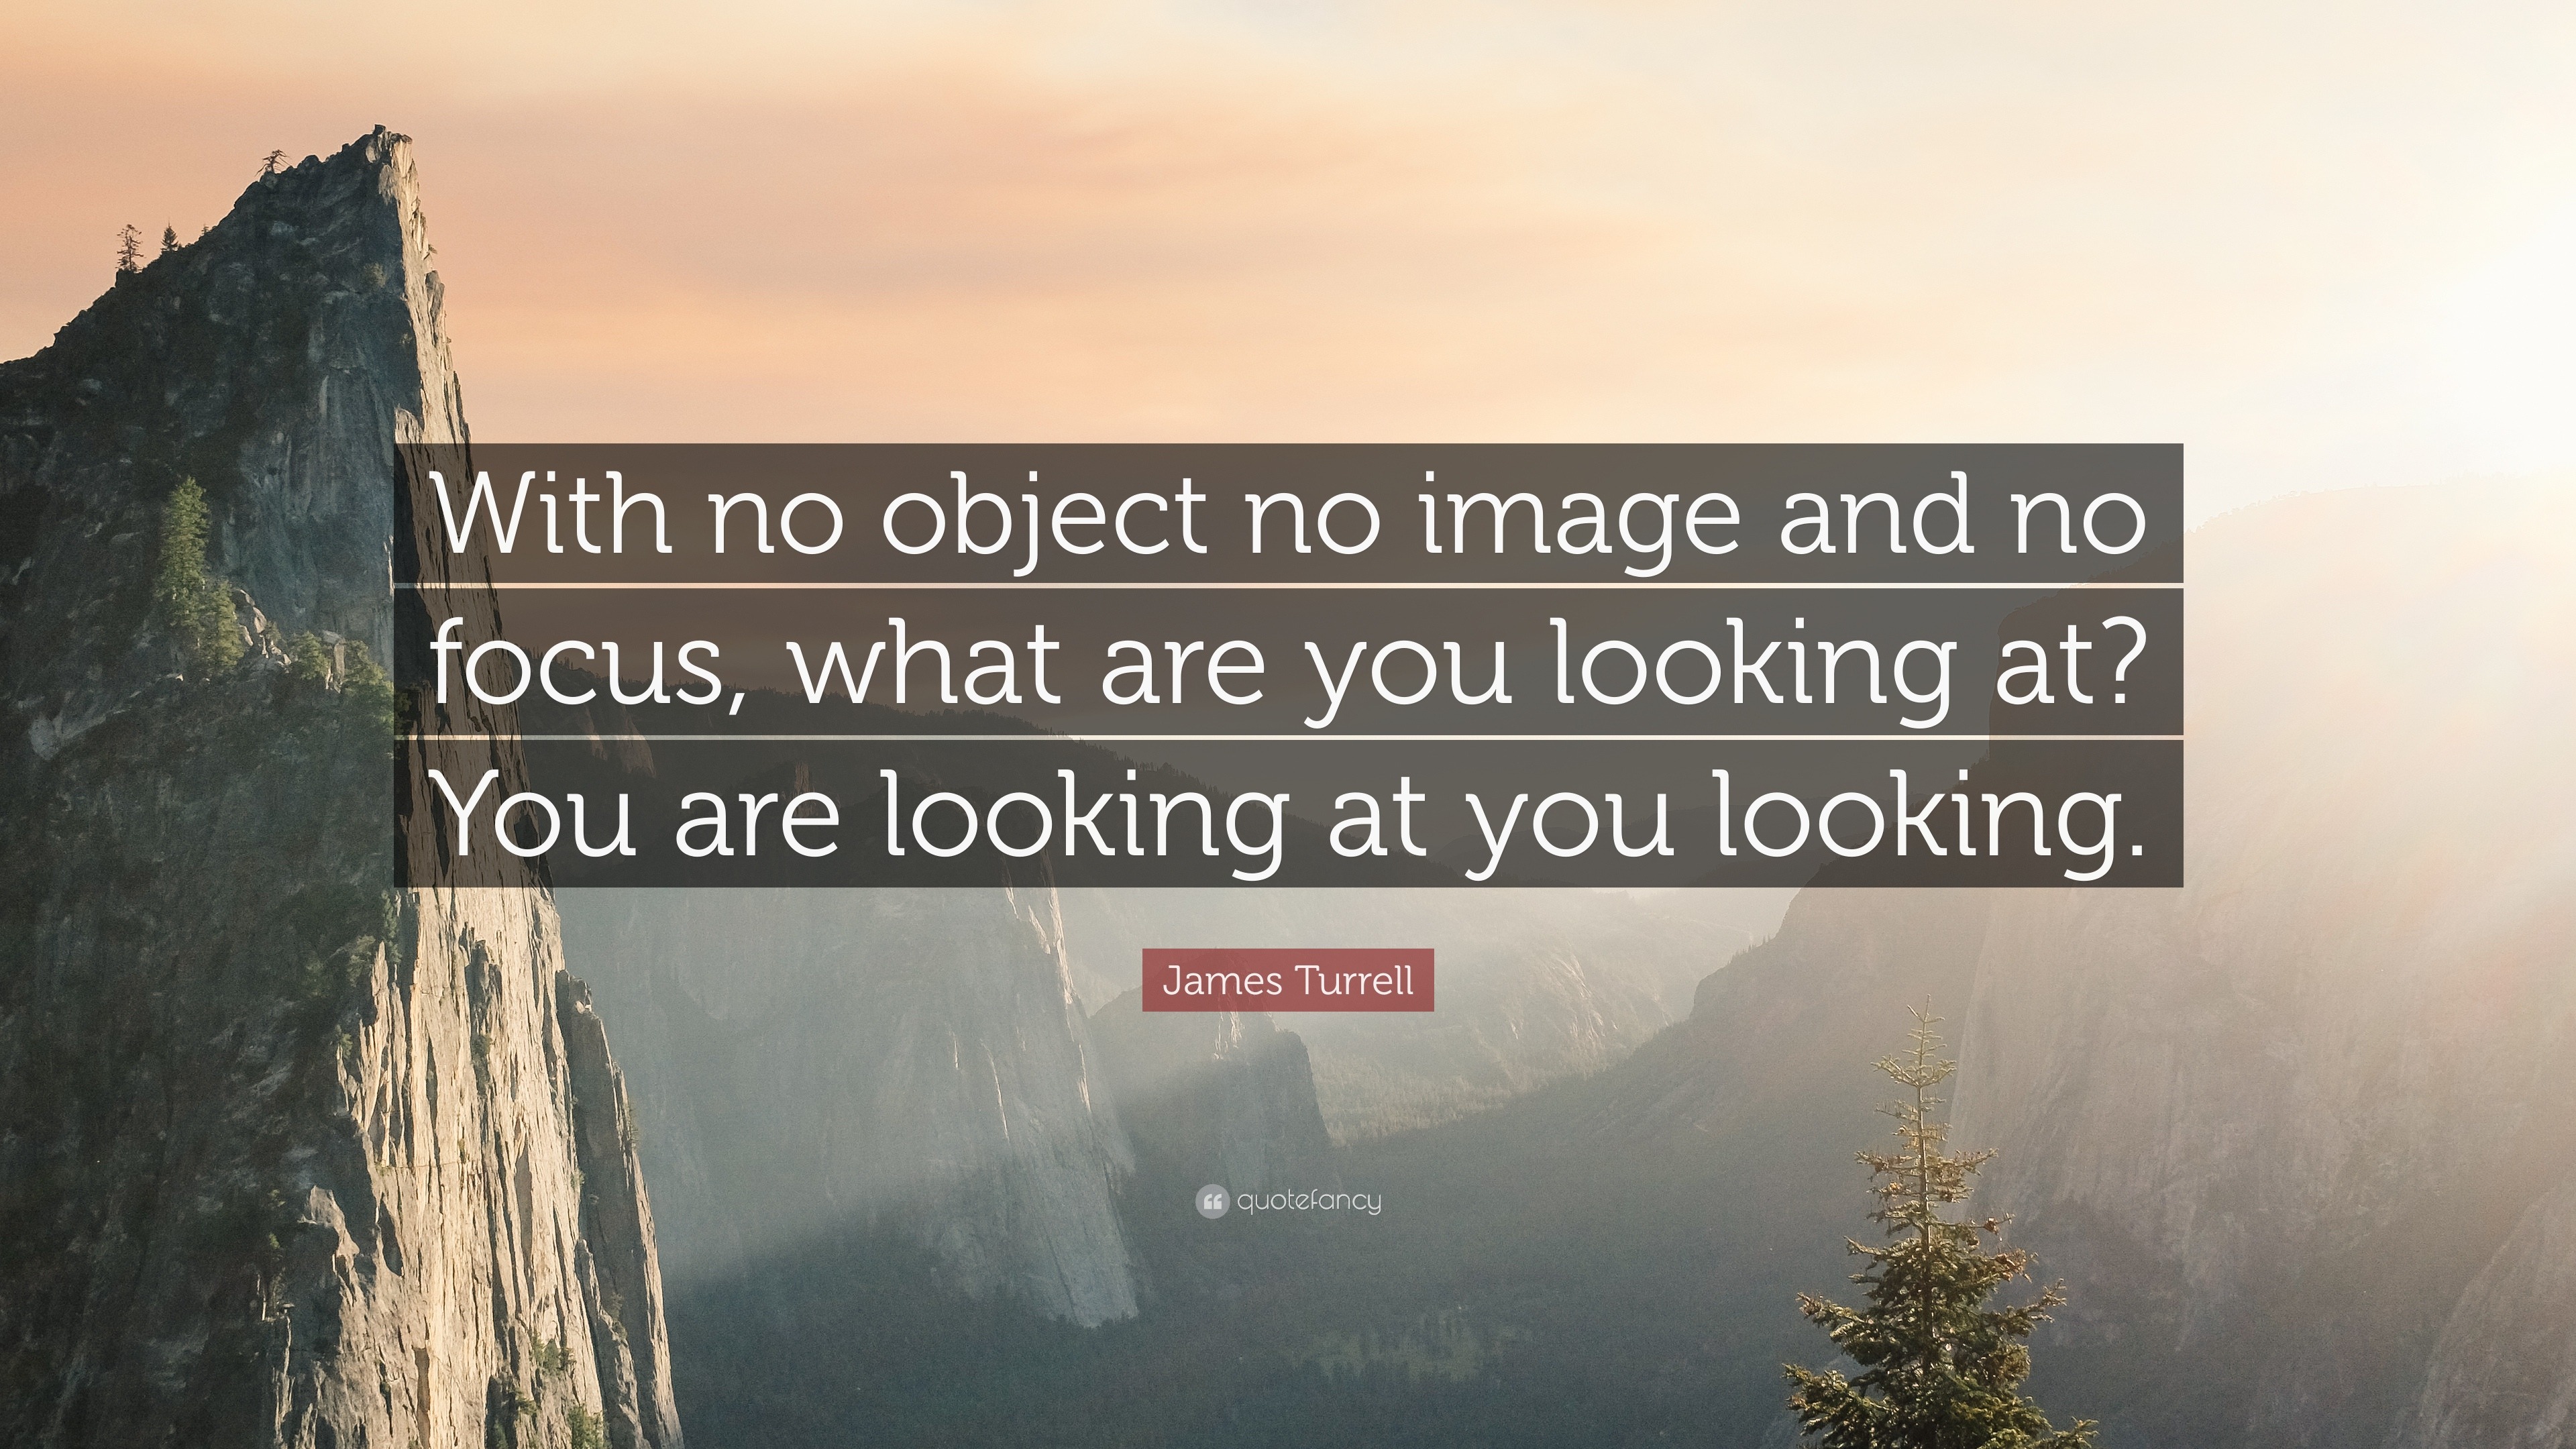 James Turrell Quote: "With no object no image and no focus, what are you looking at? You are ...